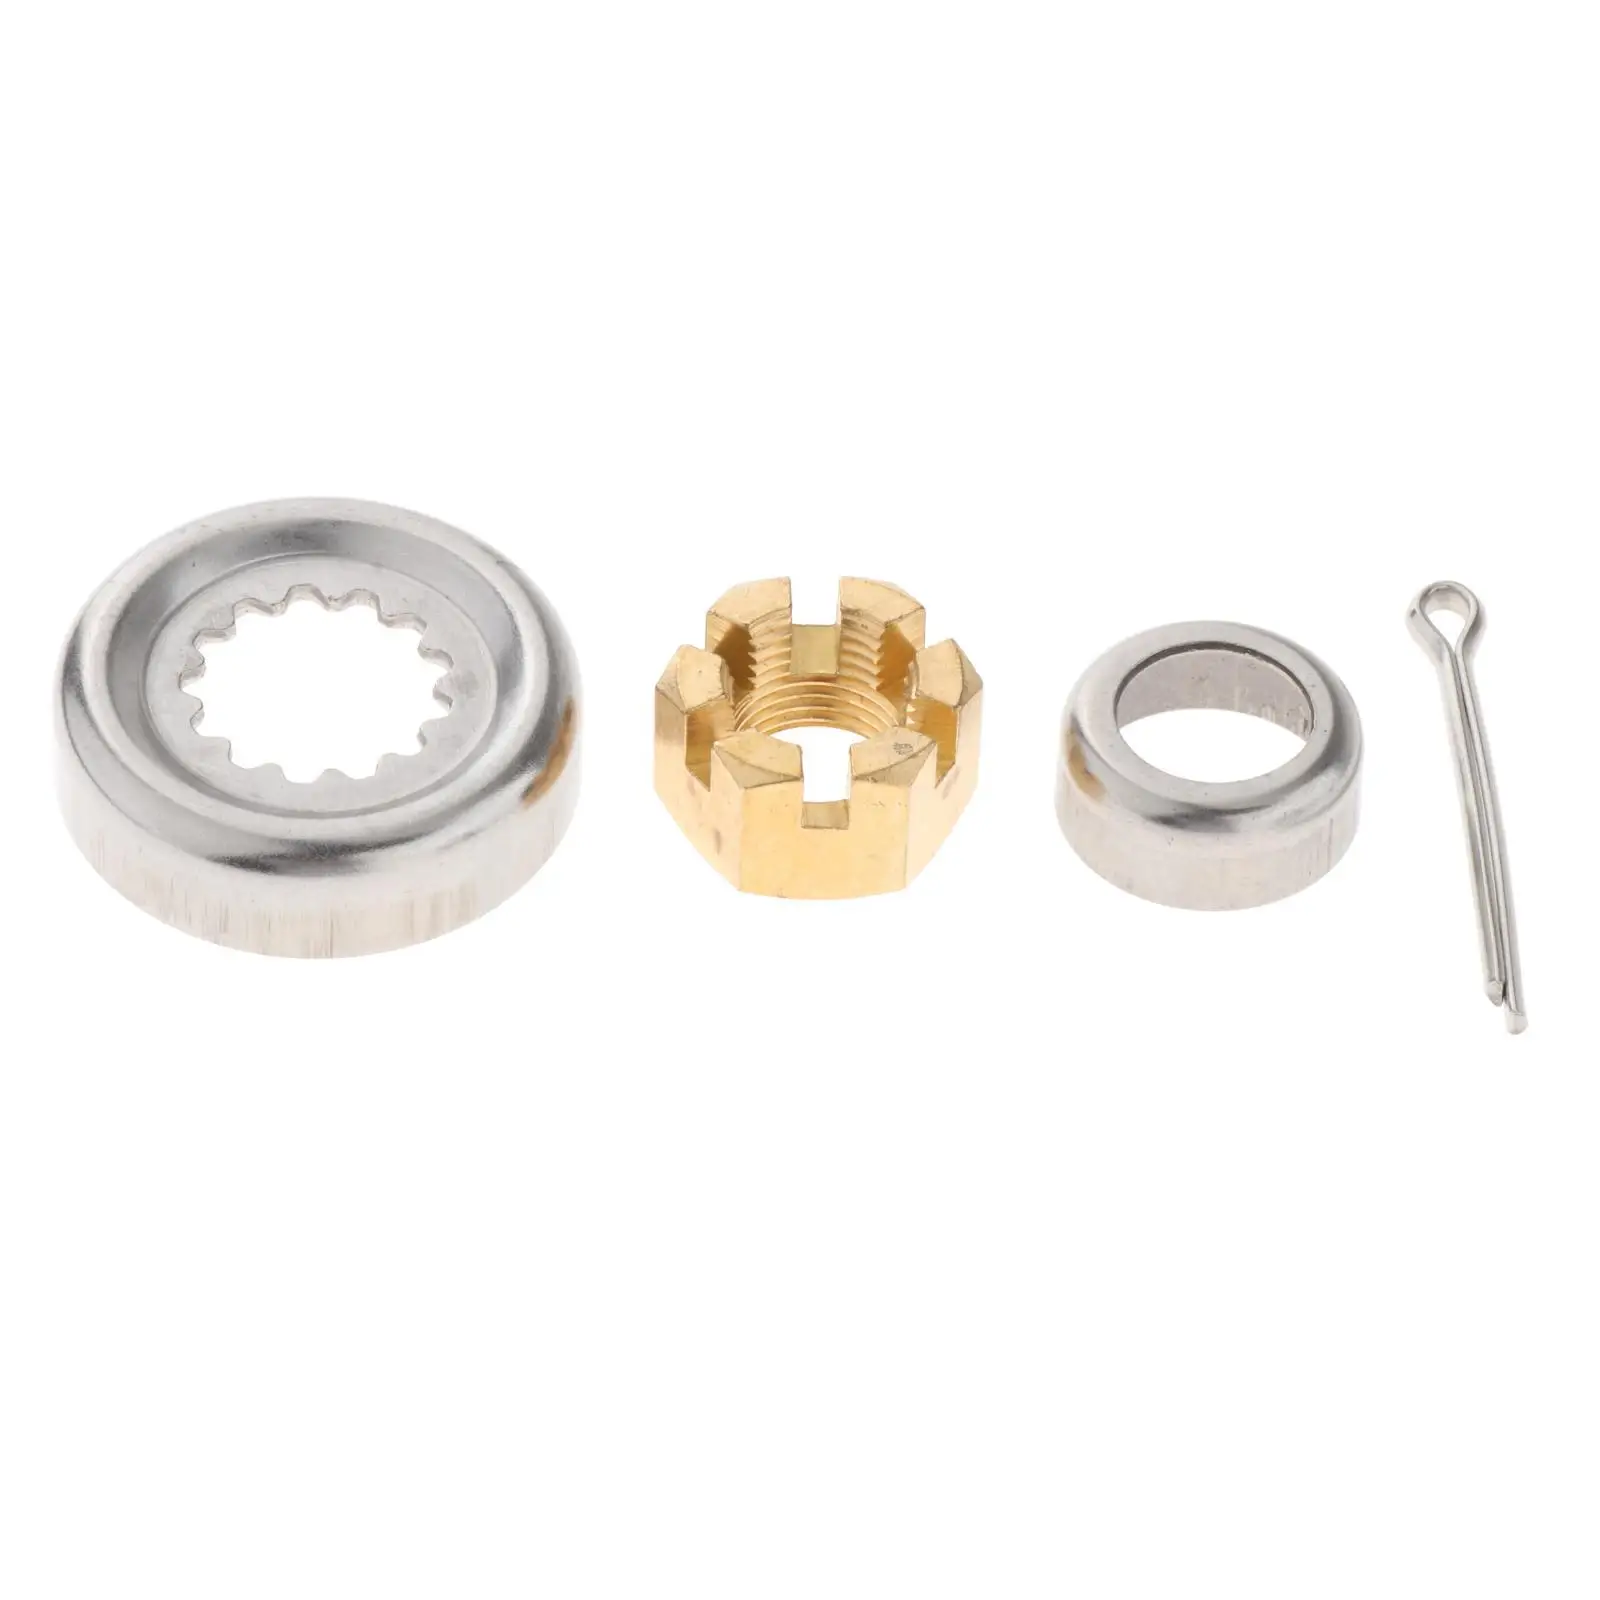 Propeller Installation Hardware Kits, 66997-00 Spacer Fit  Outboard F30-F60 4T/2T Replacement Spare 